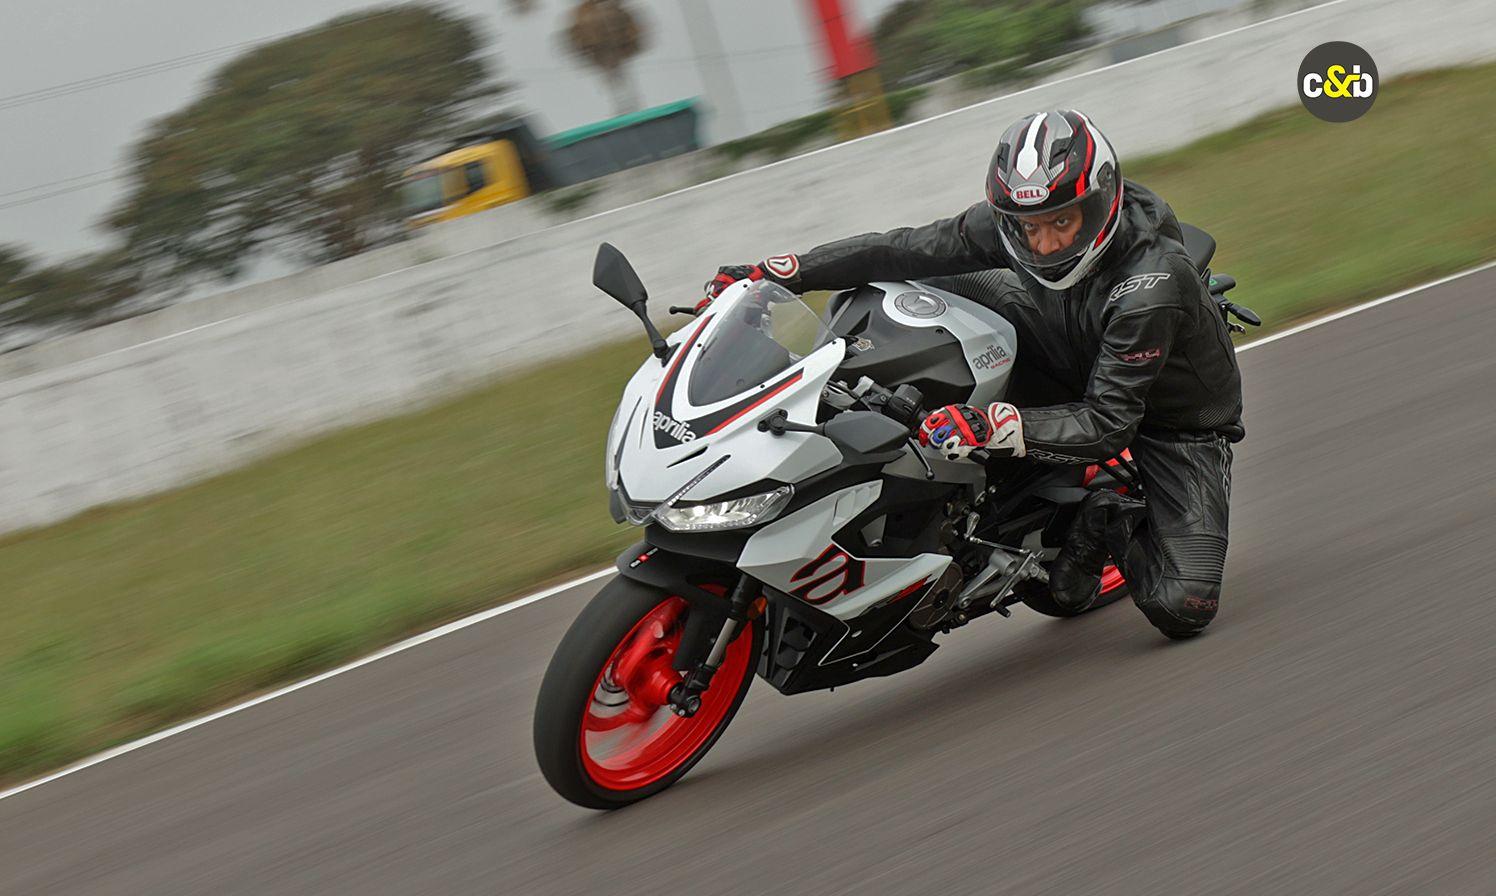 The Aprilia RS 457 looks good, rides well, and is quite desirable. Should you consider buying it? A quick review through some images.